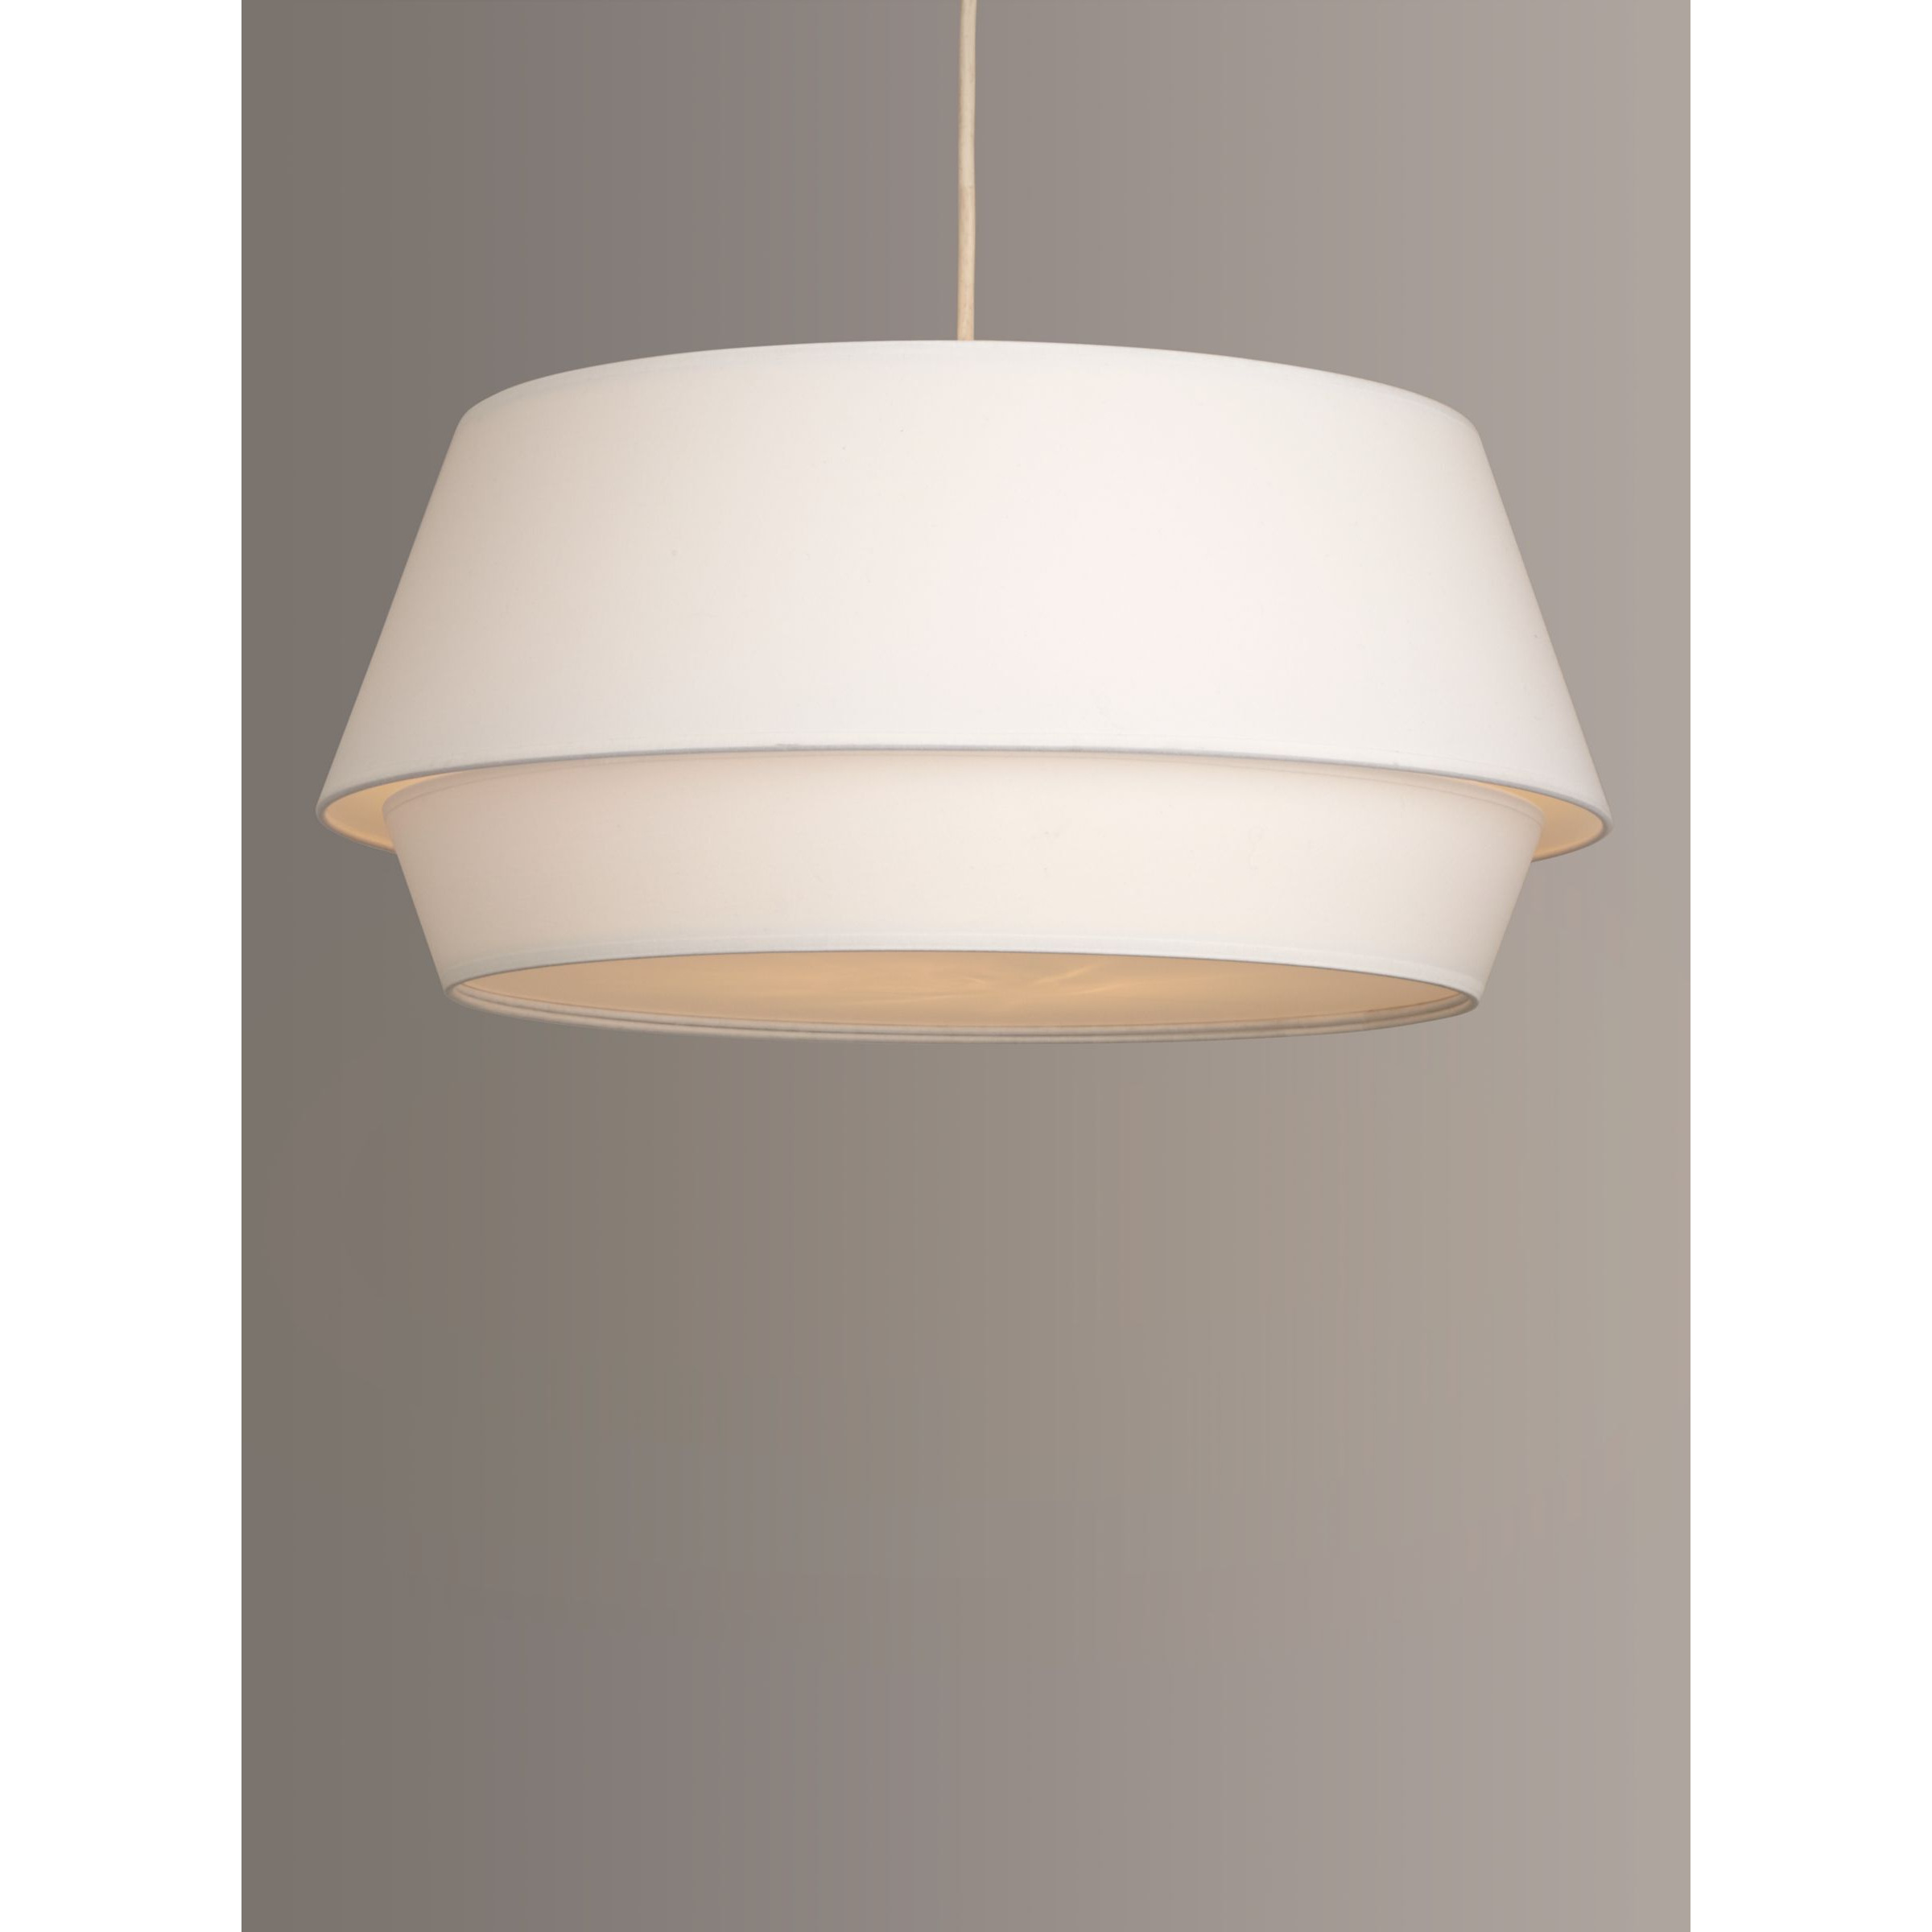 John Lewis Lisbeth Easy-to-Fit Ceiling Shade - image 1